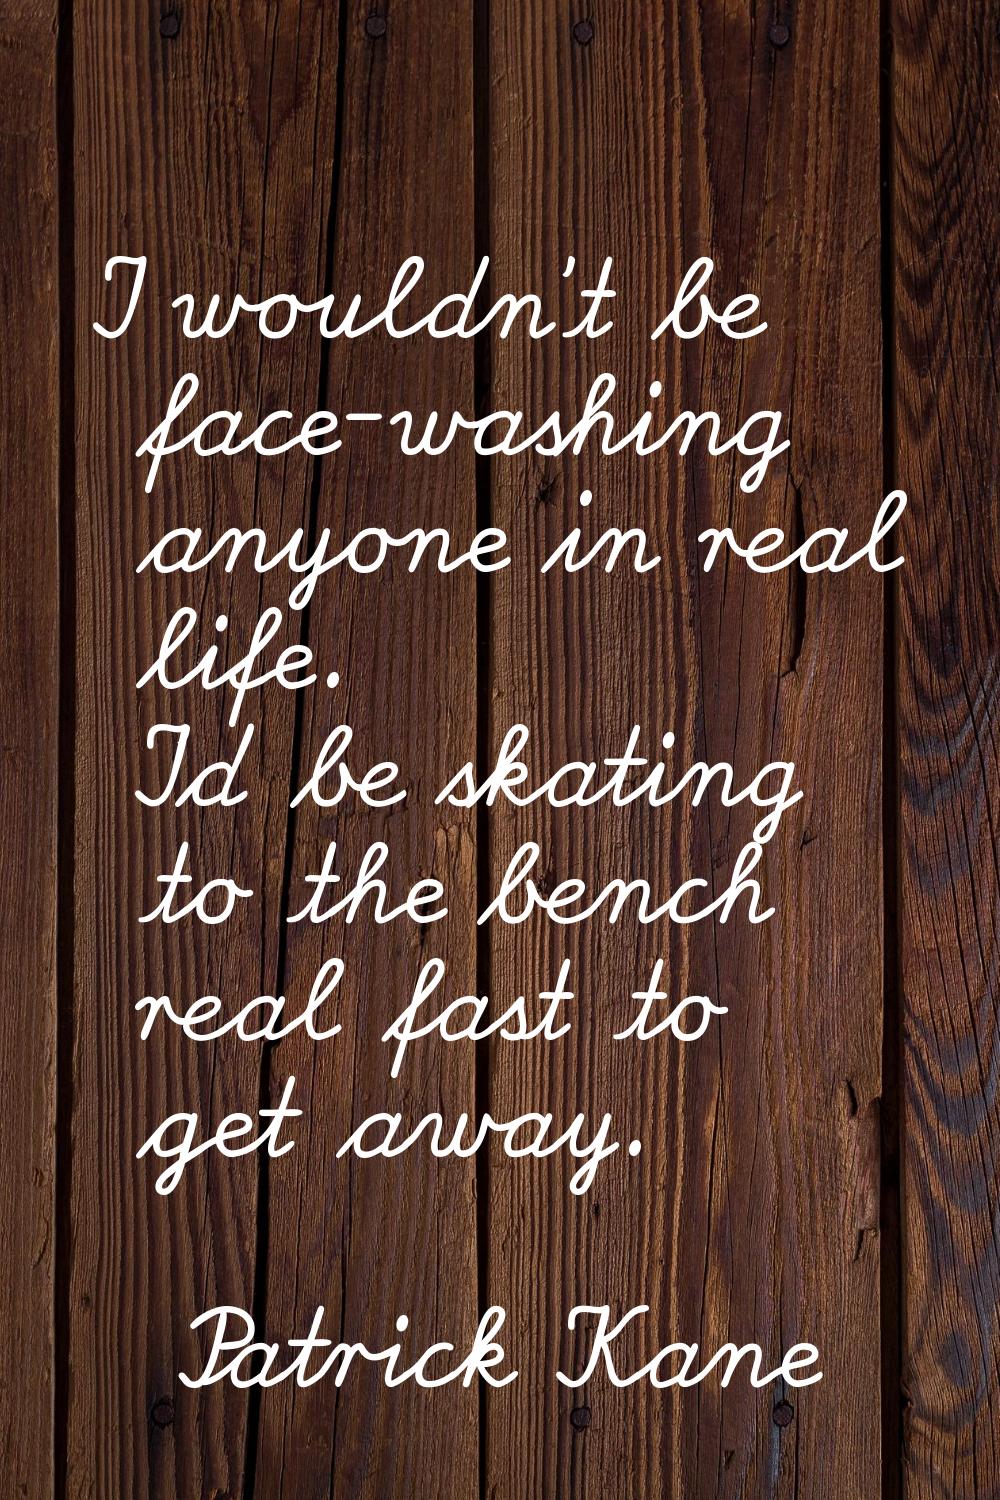 I wouldn't be face-washing anyone in real life. I'd be skating to the bench real fast to get away.